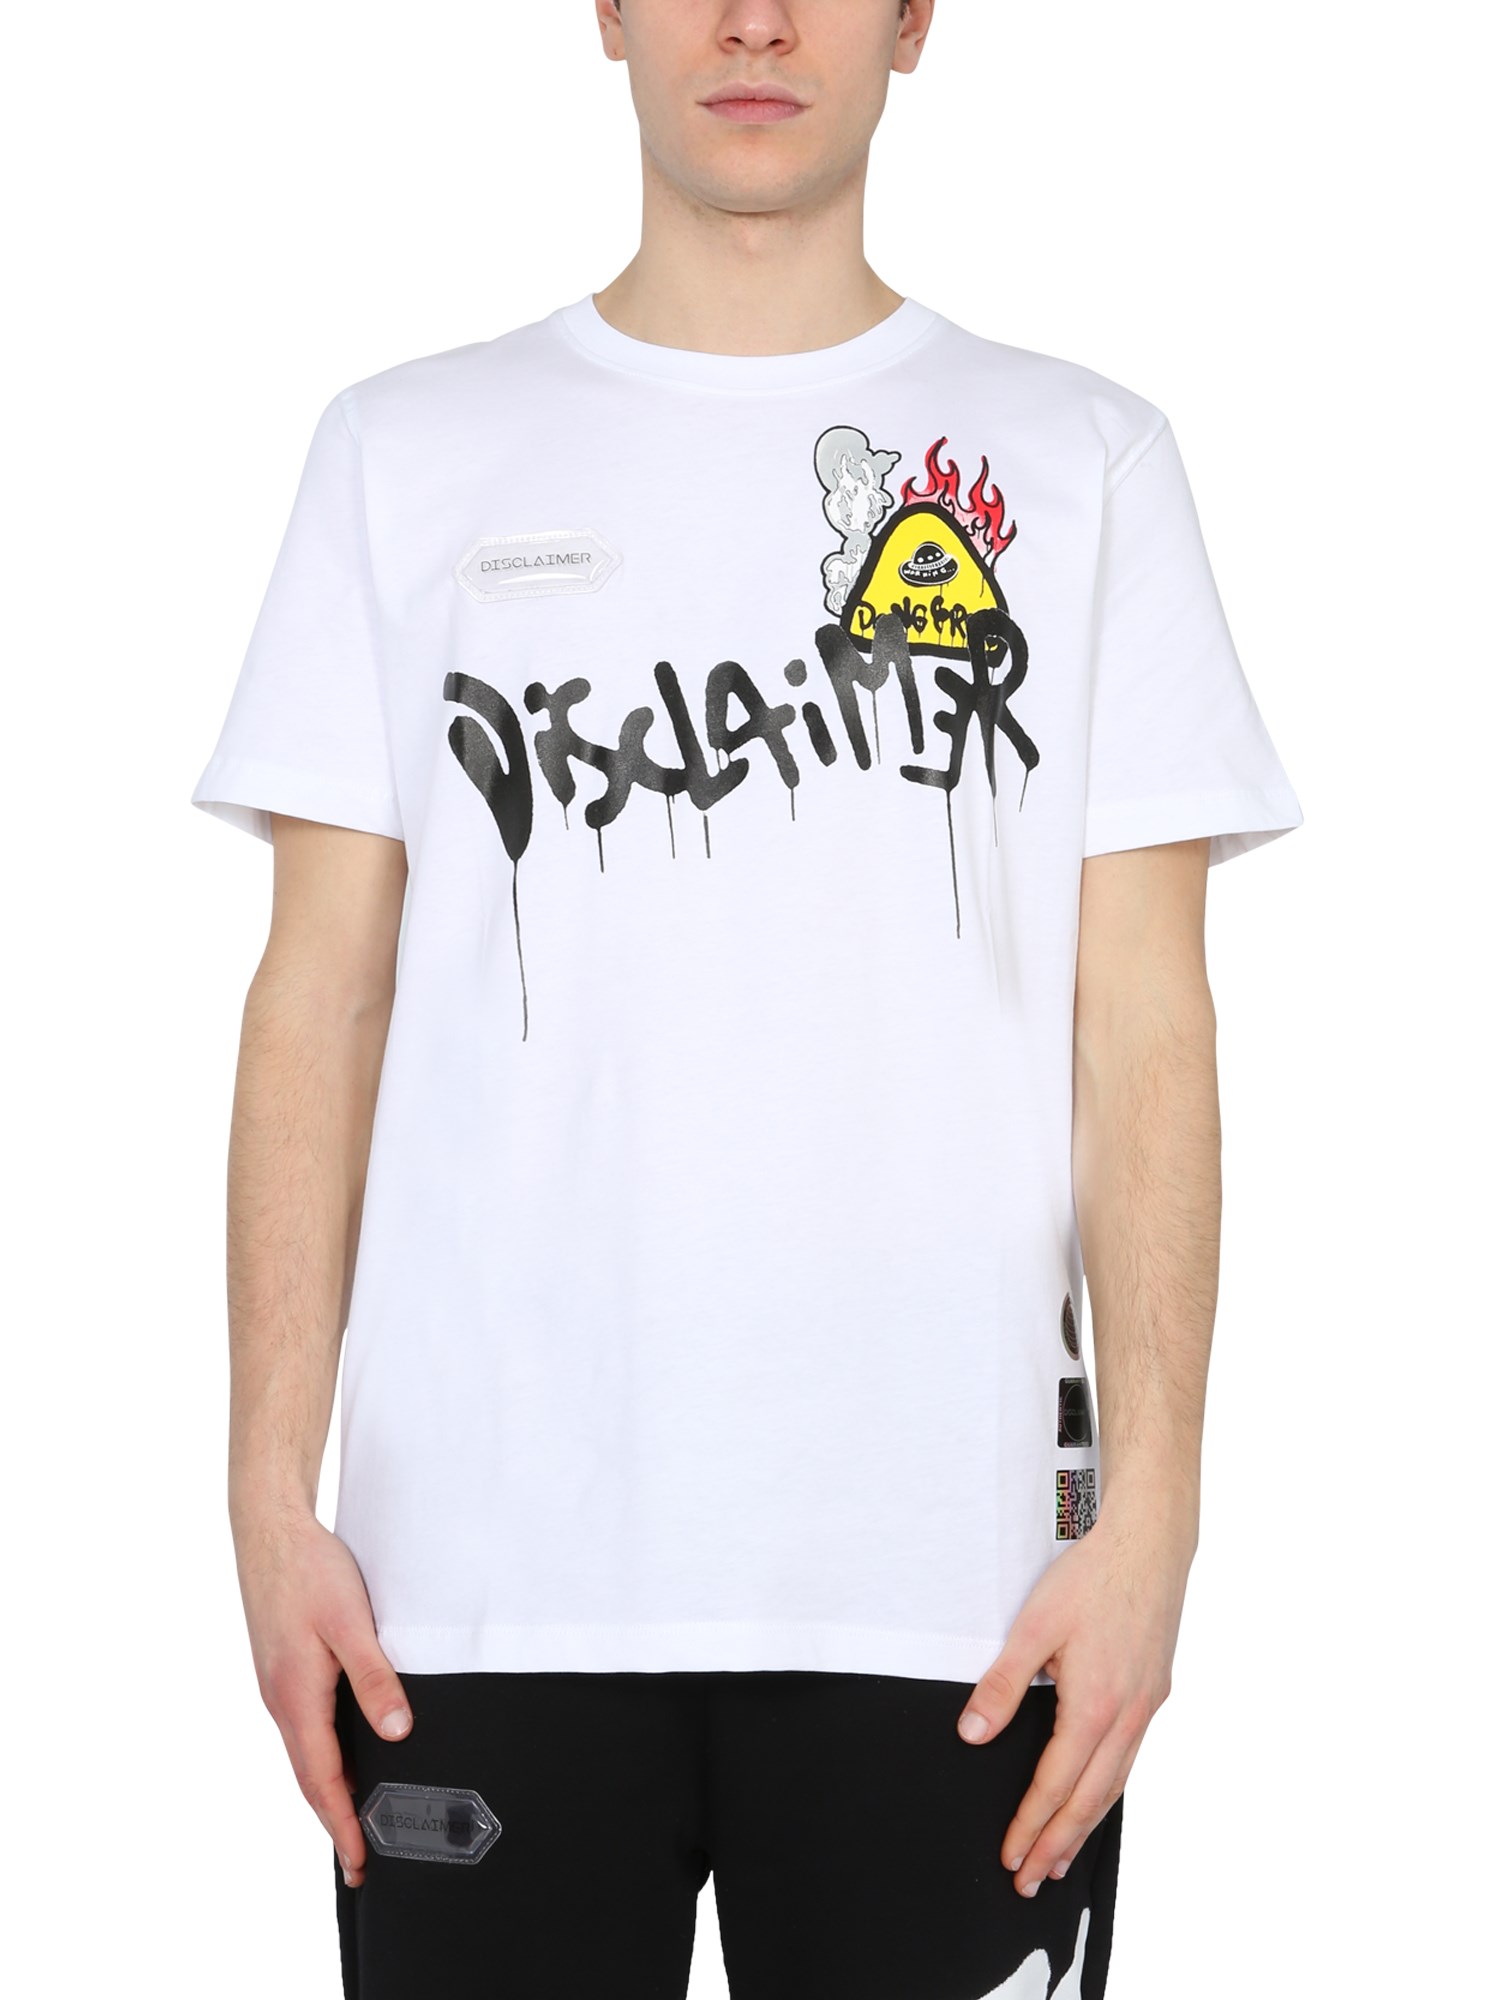 disclaimer t-shirt with screen print and holograms